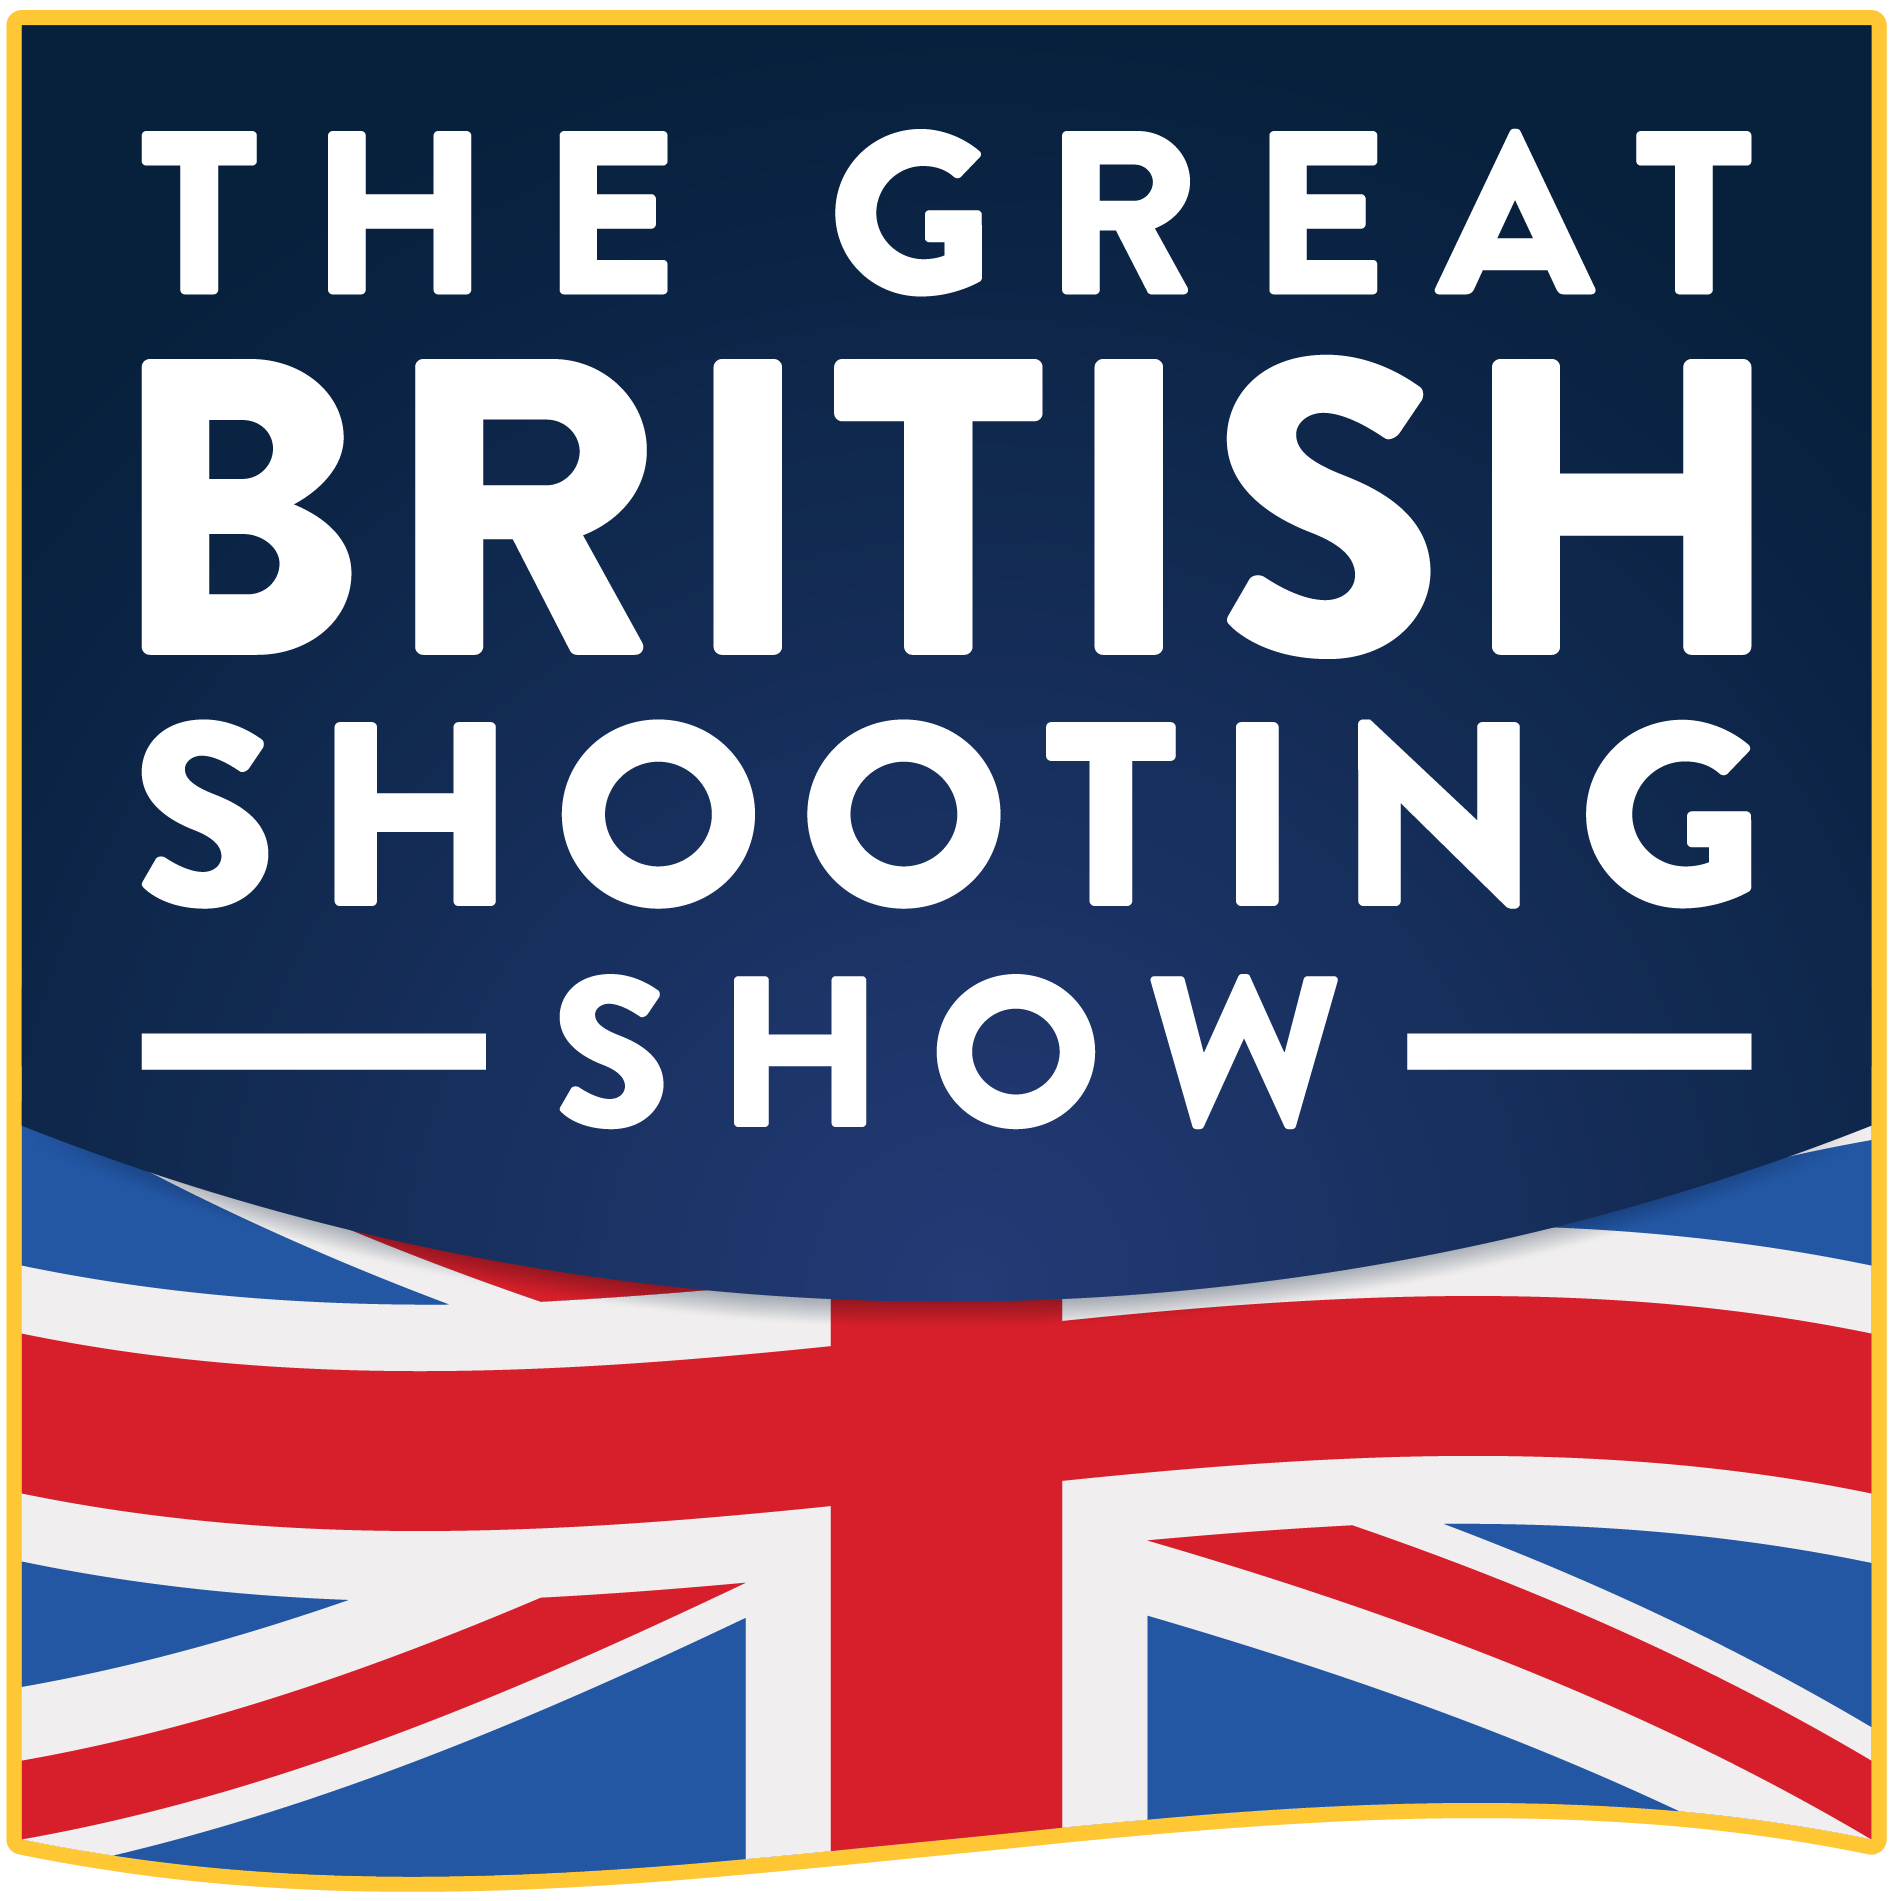 Marketing with the British Shooting Show